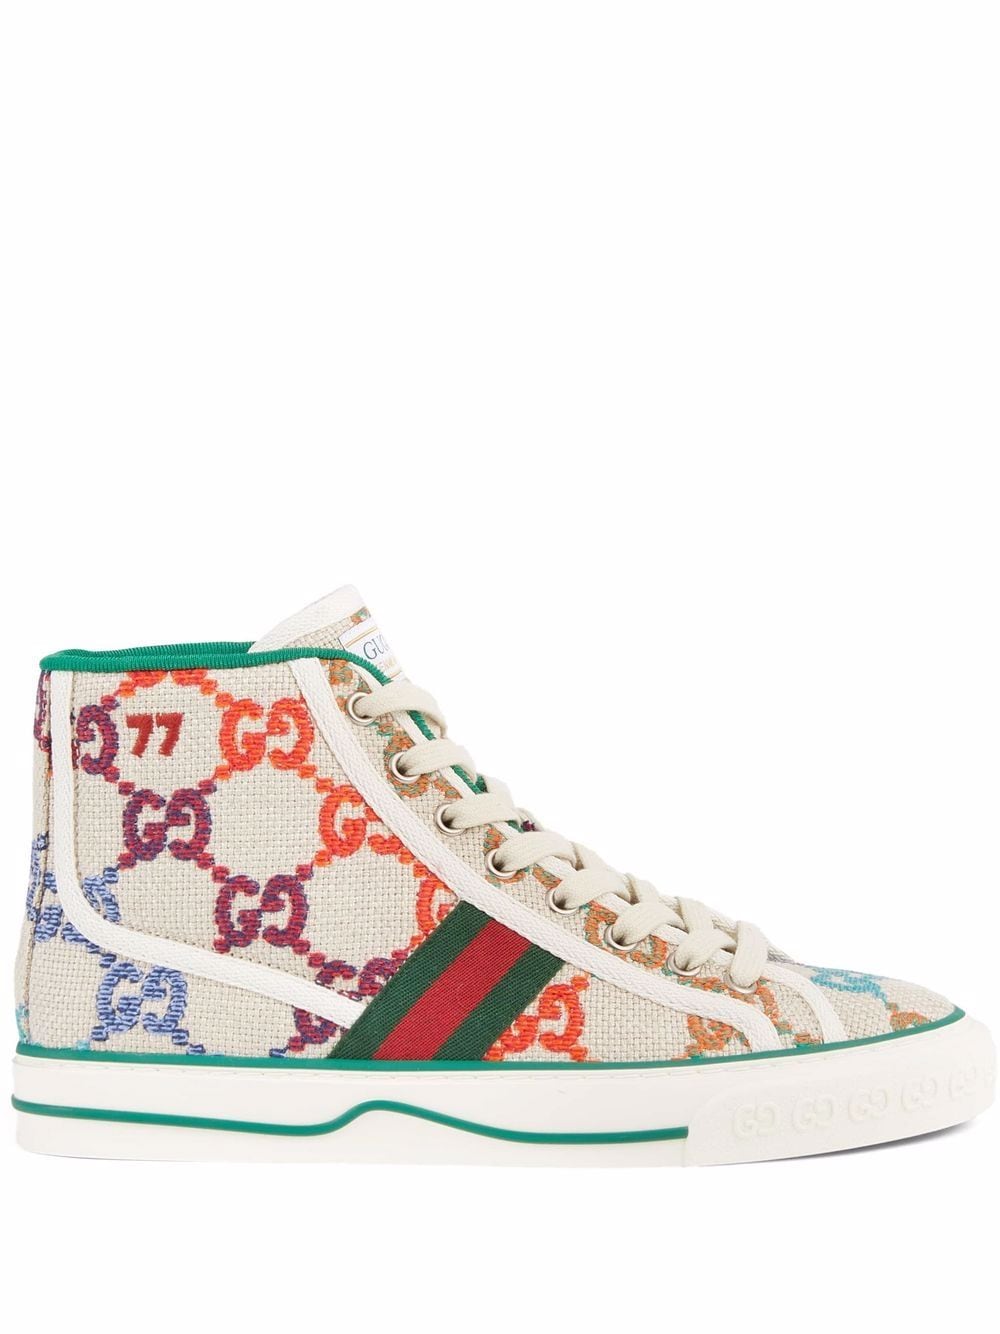 Gucci All Over Monogram Print Rainbow Street Style in Harajuku w/ Gucci  Jeweled Sneakers – Tokyo Fashion